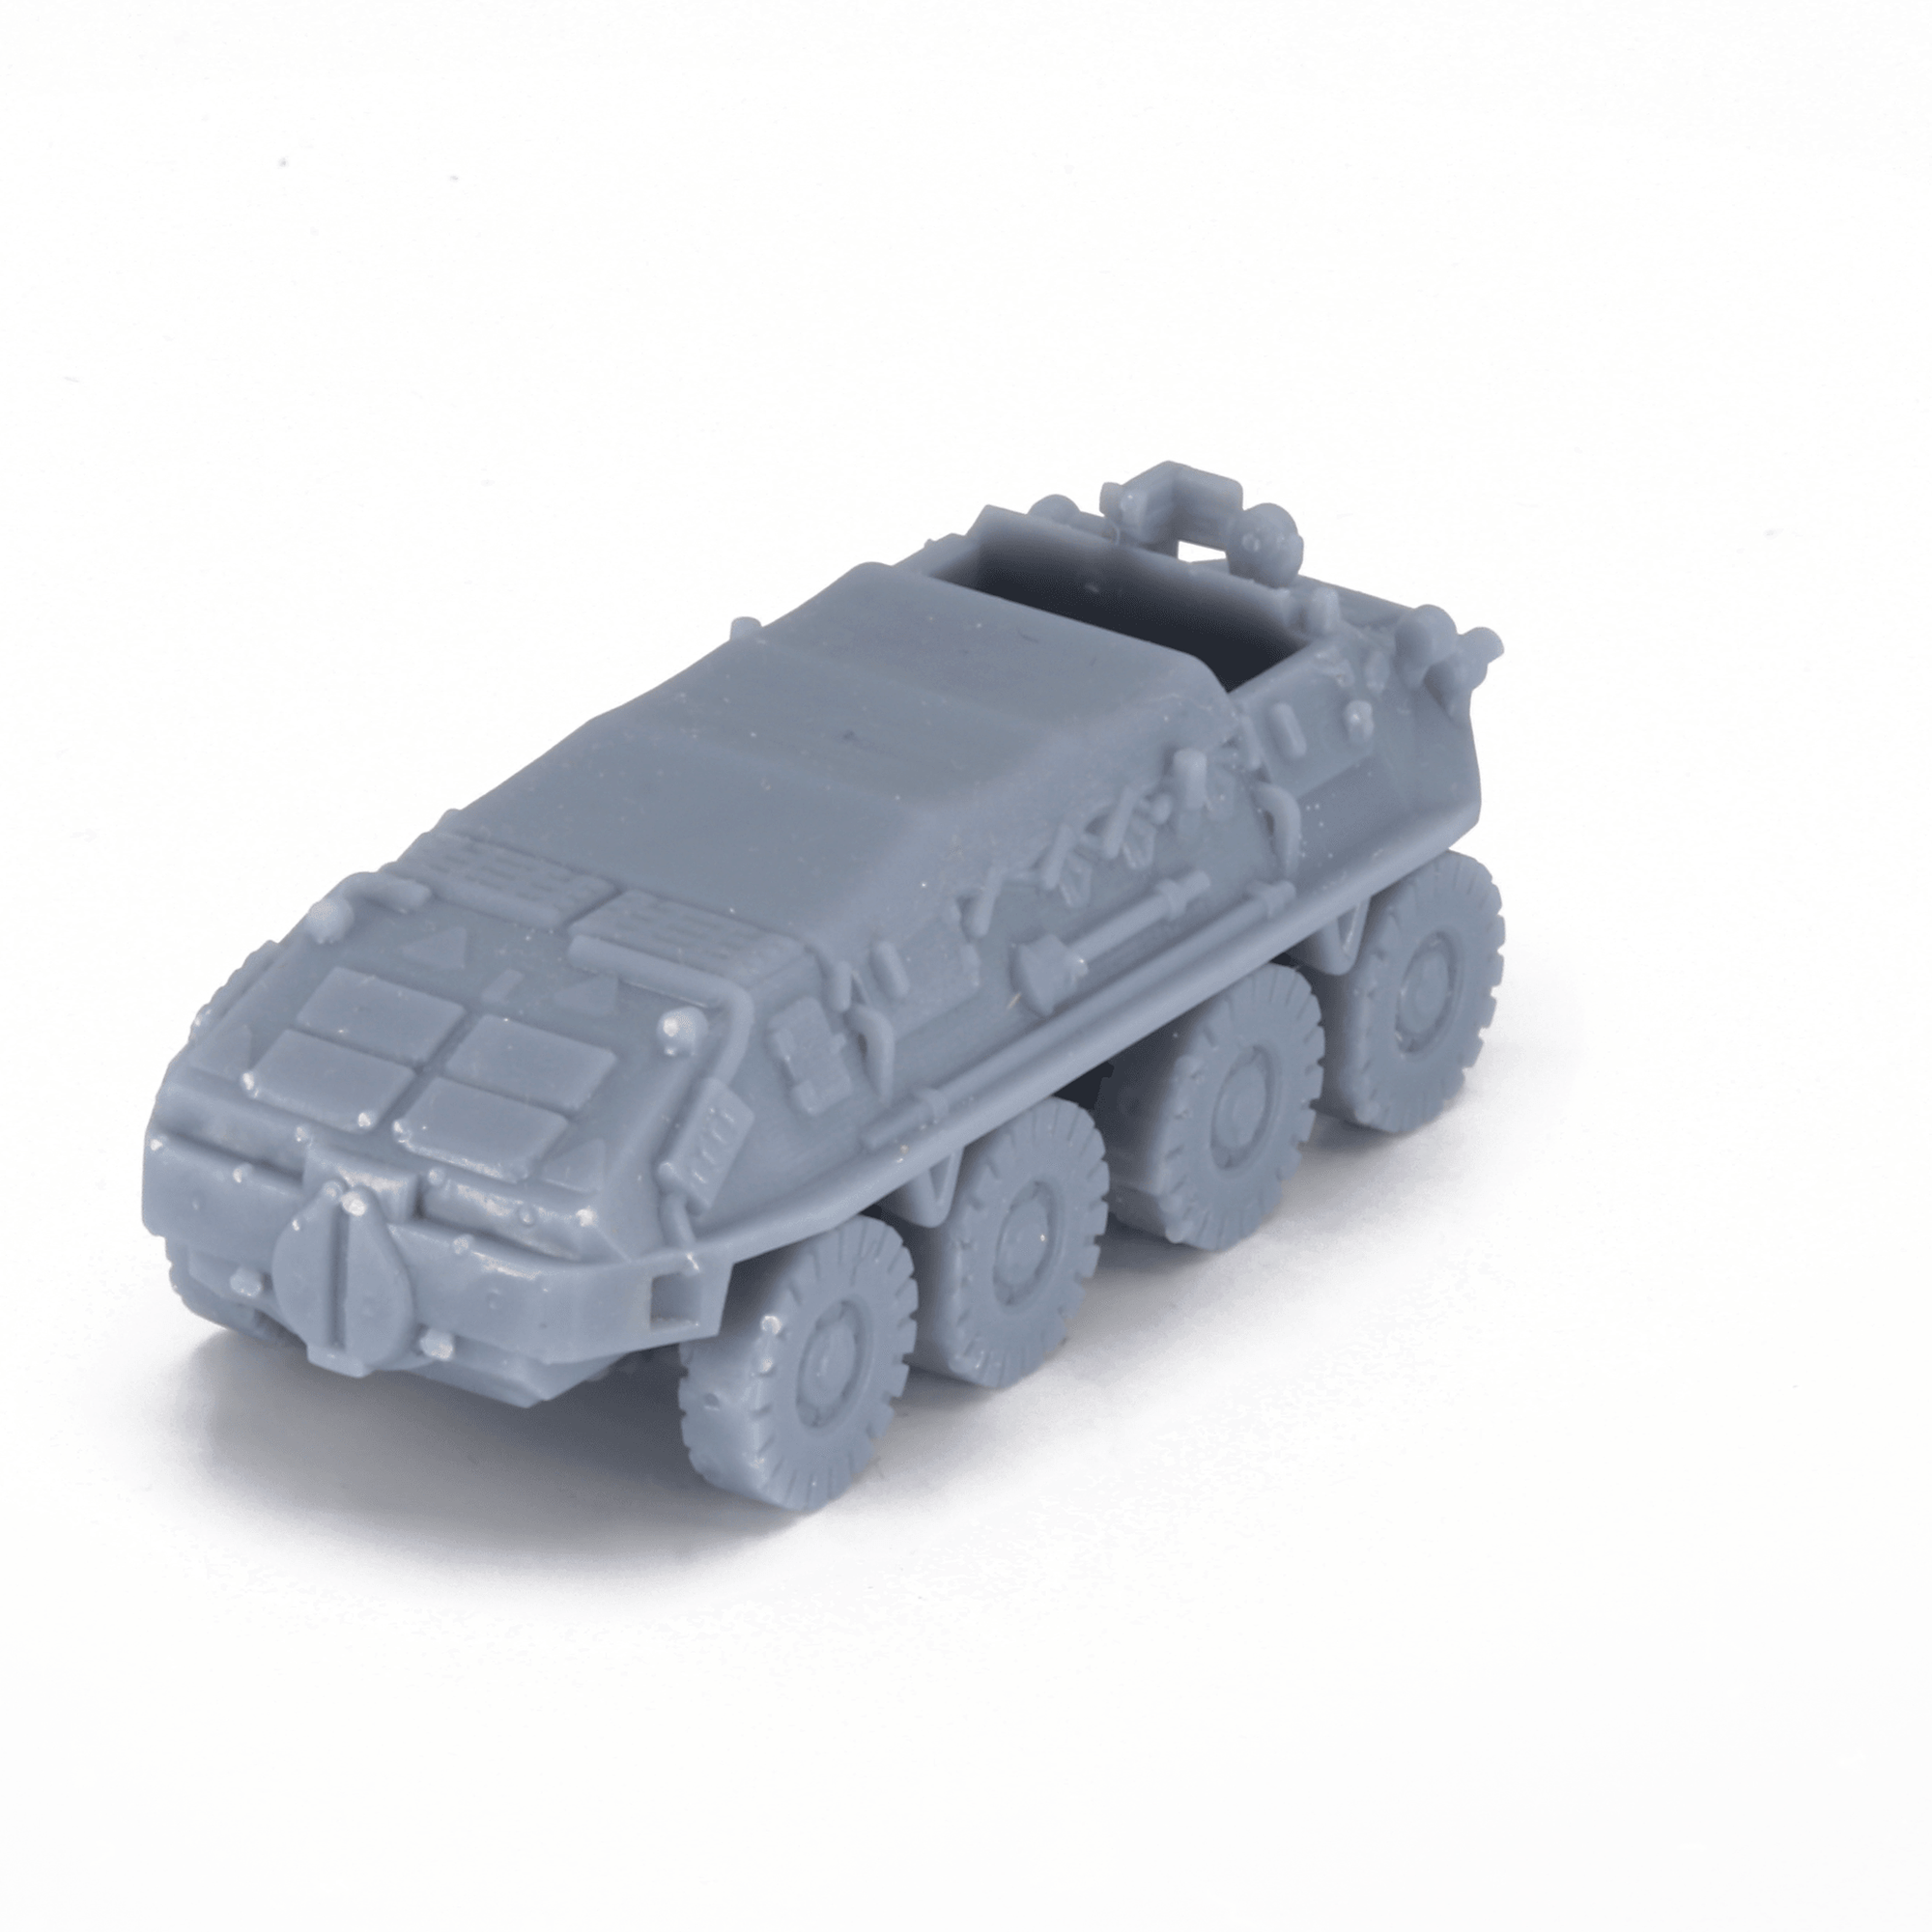 BTR-40P Closed with MG - Alternate Ending Games - axis-and-allies